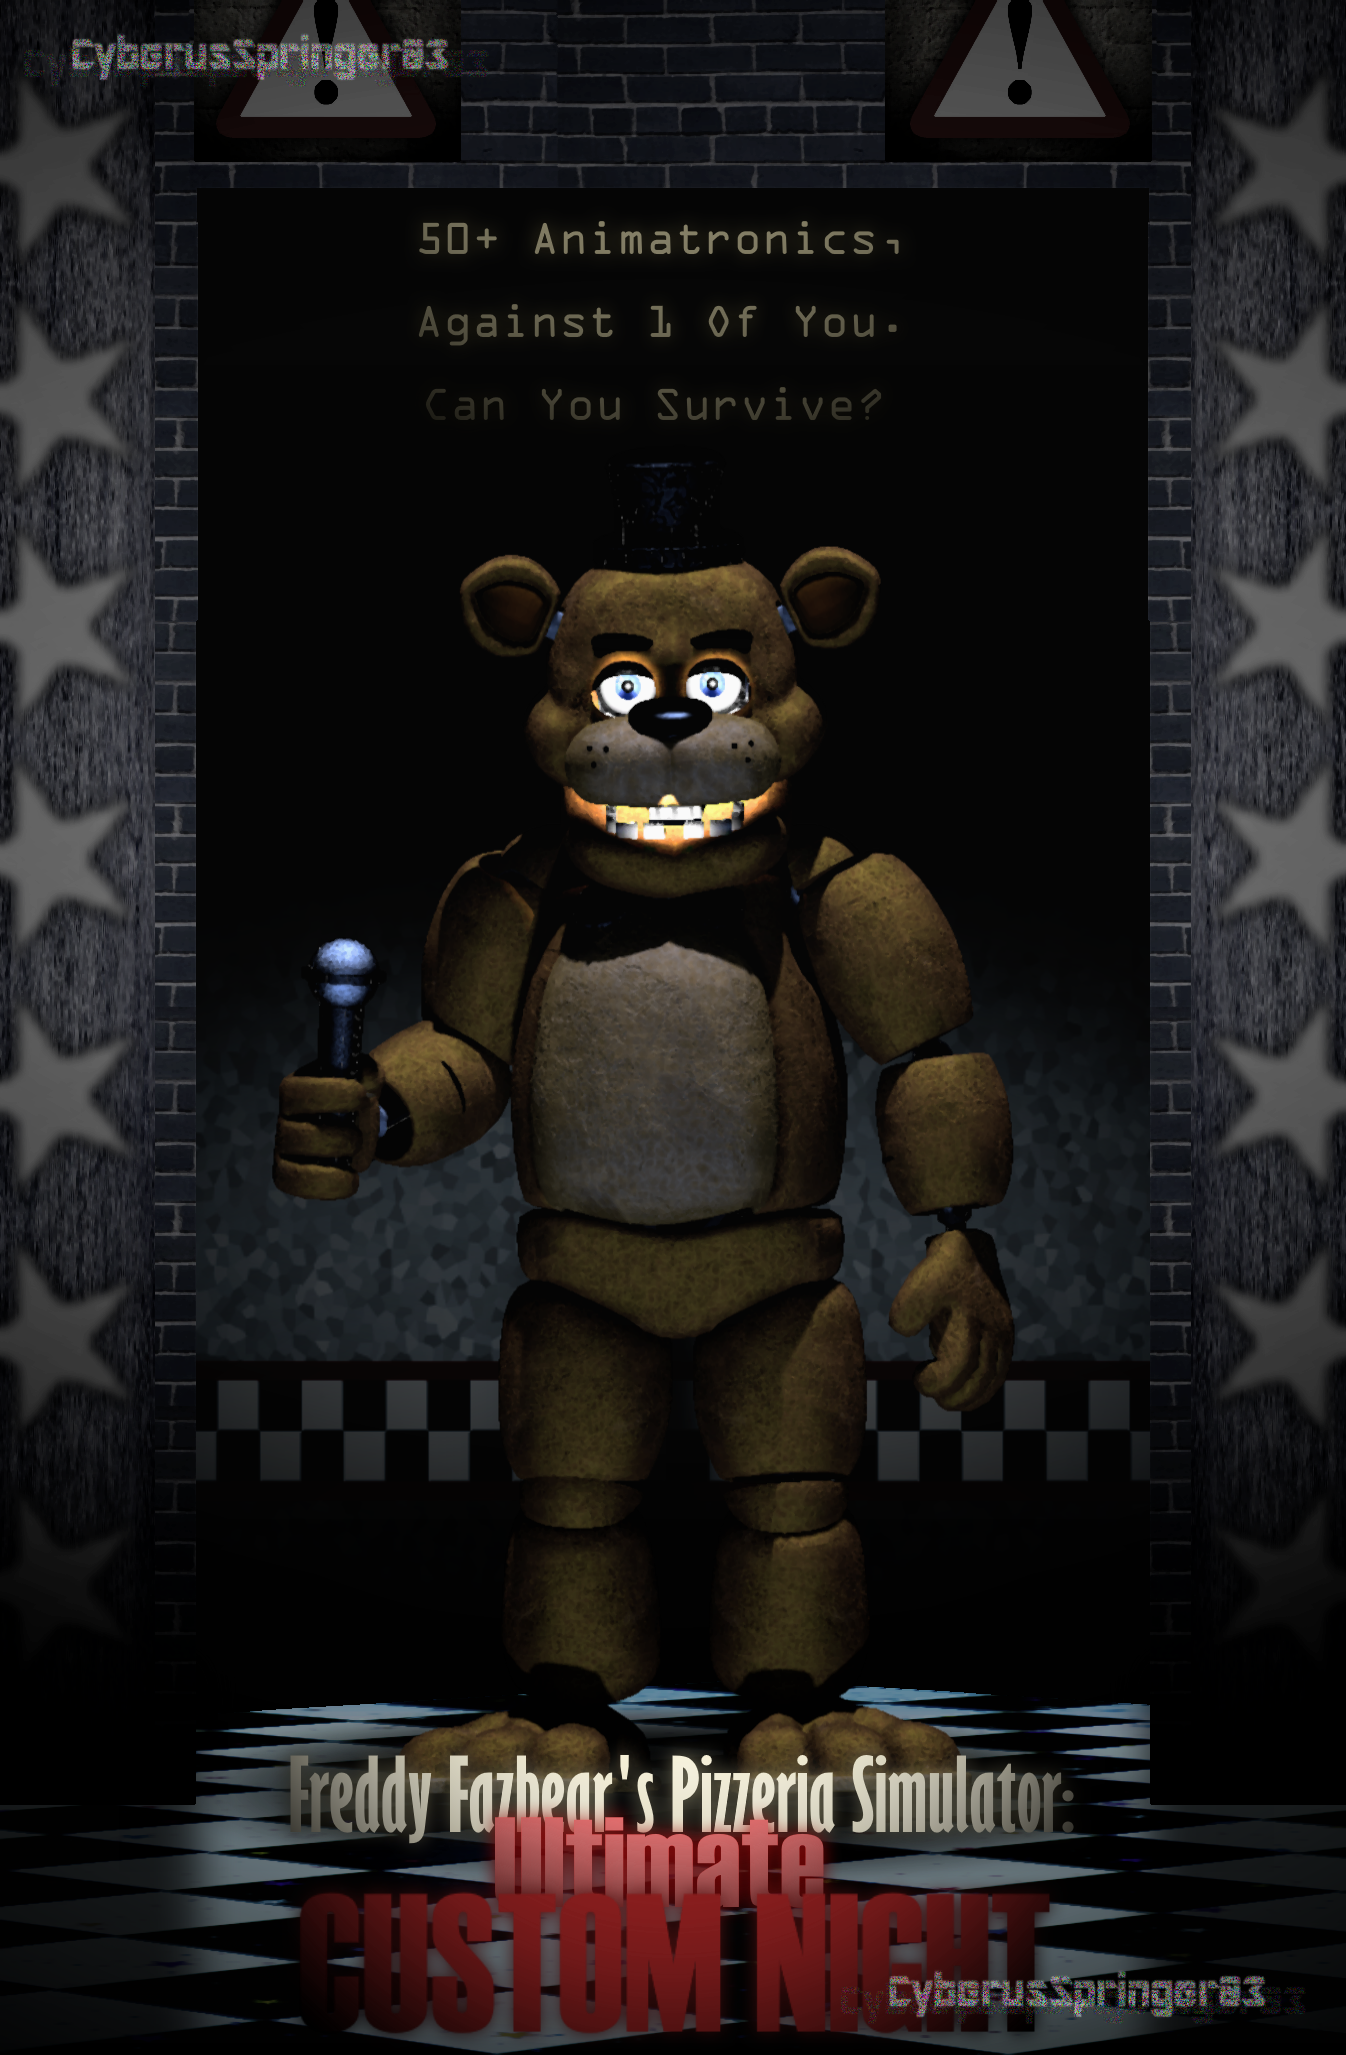 five nights at freddys ultimate custom night | Poster